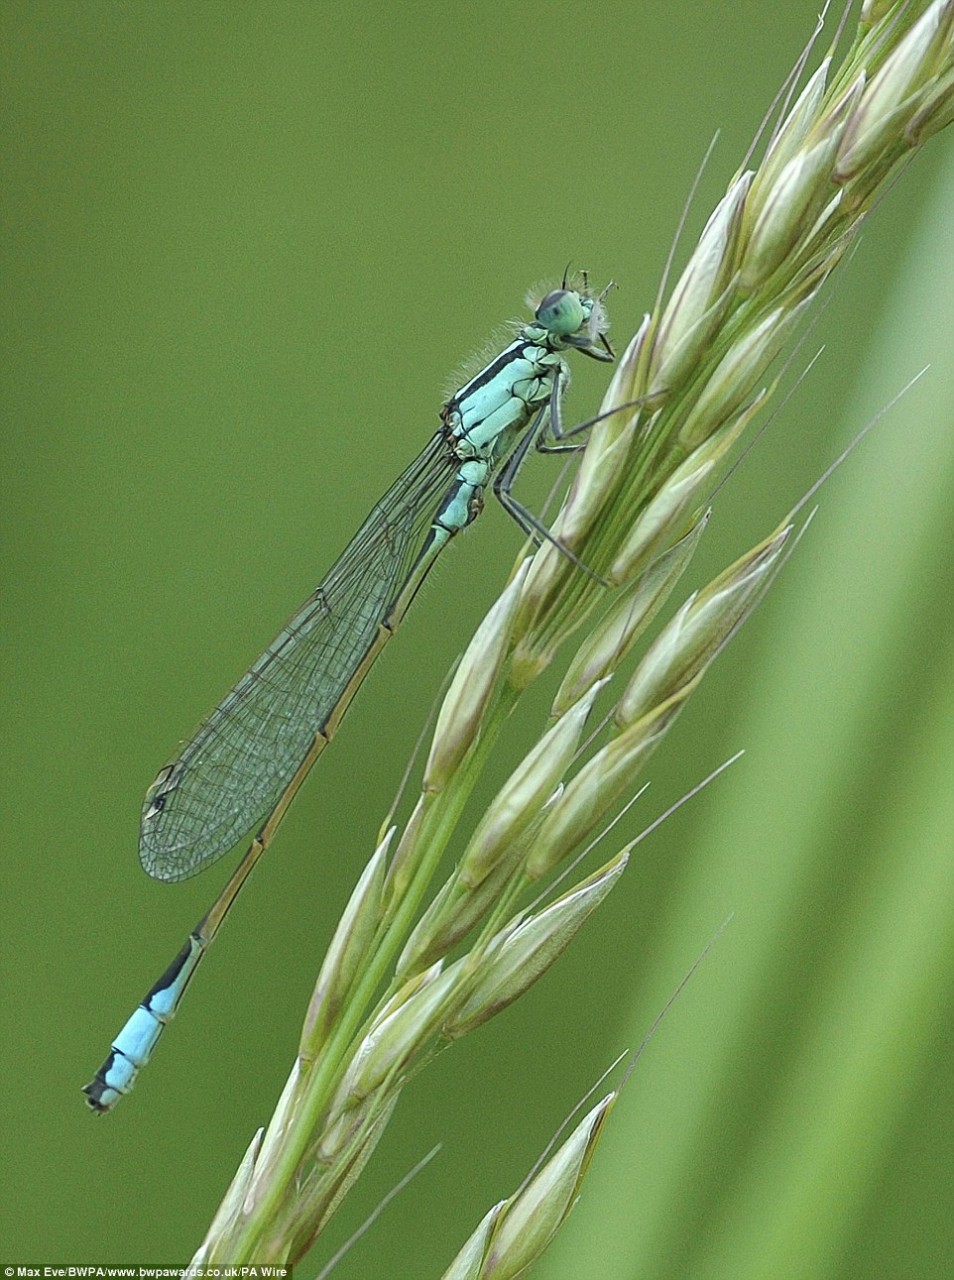 Max Eve from Hexham, Northumberland, took this image of a blue-tailed damselfly to claim the title in the under 12 years category